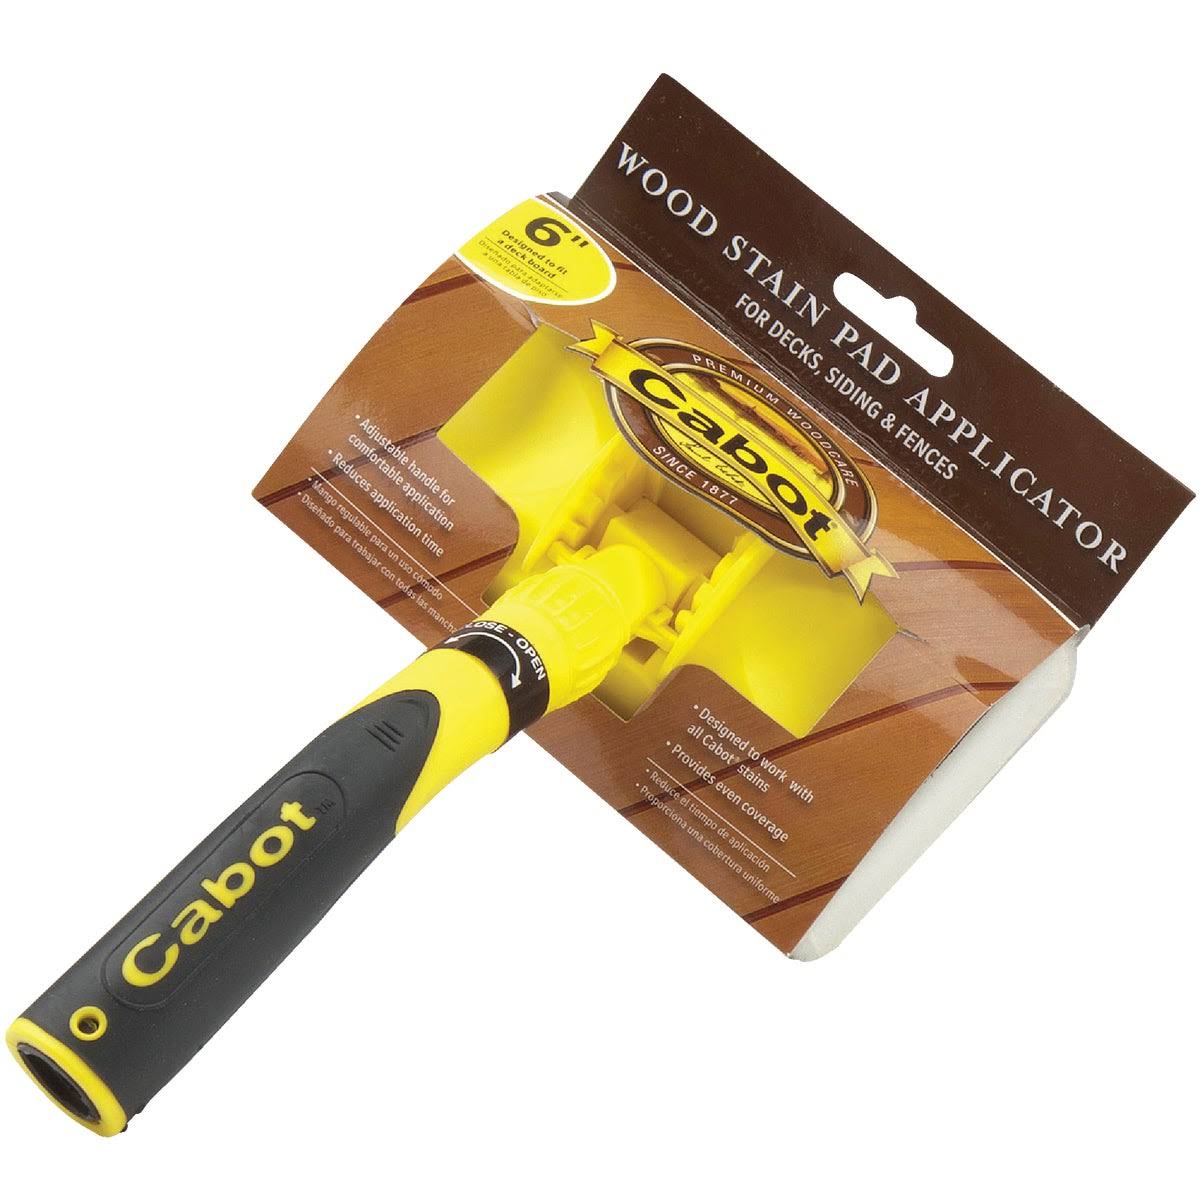 Cabot Wood Stain Pad Applicator - 6"